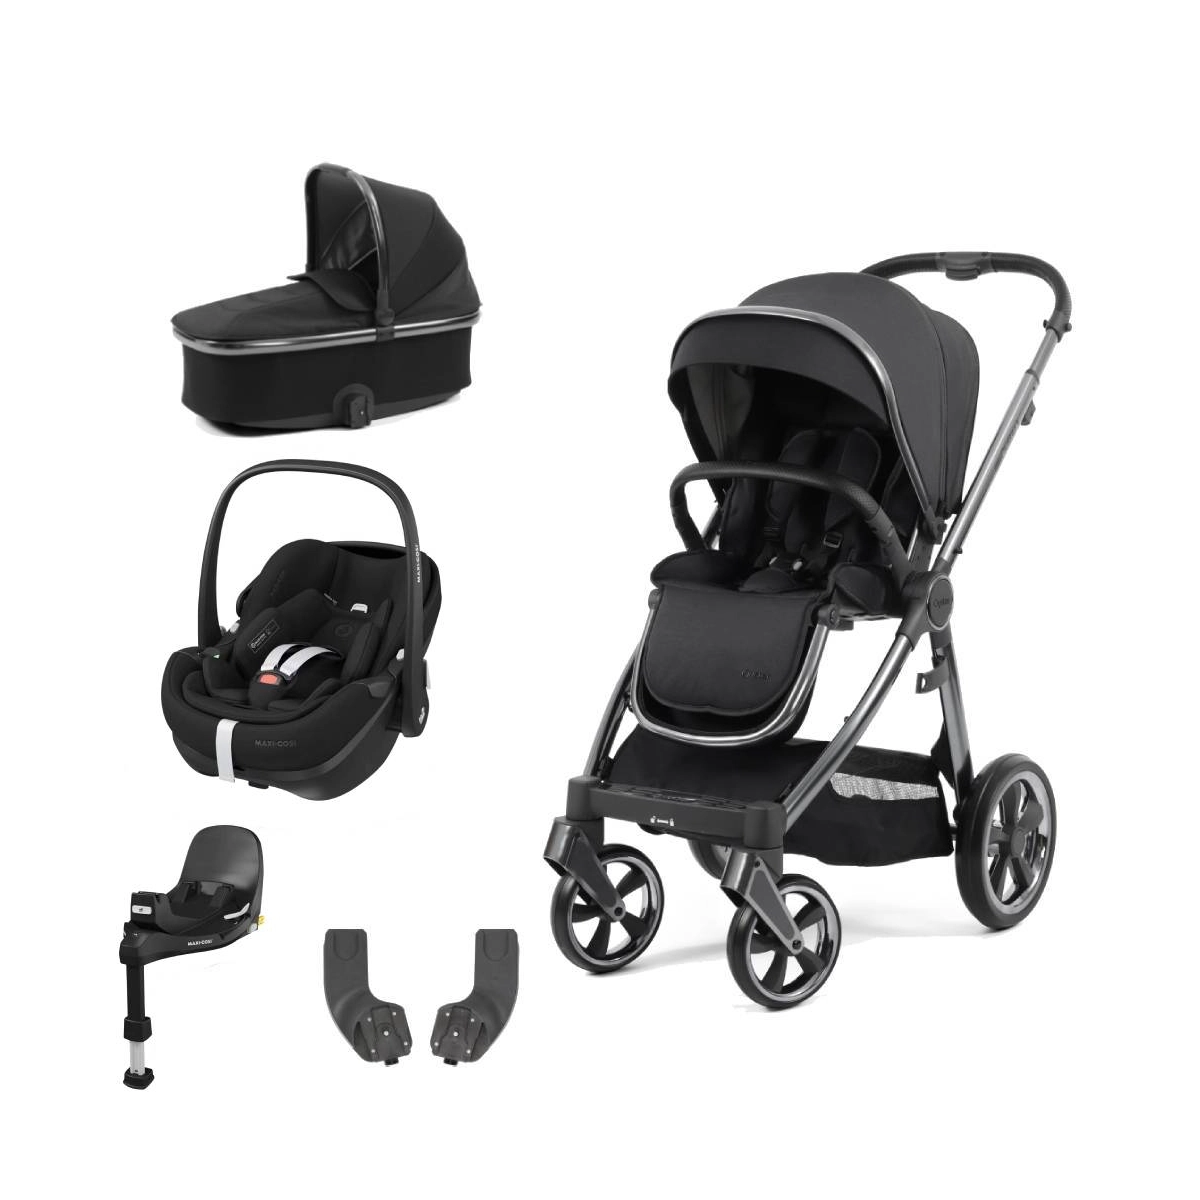 BabyStyle Oyster 3 Gun Metal Chassis Essential 5 Piece Bundle with Maxi Cosi Pebble 360 Pro Car Seat & Base